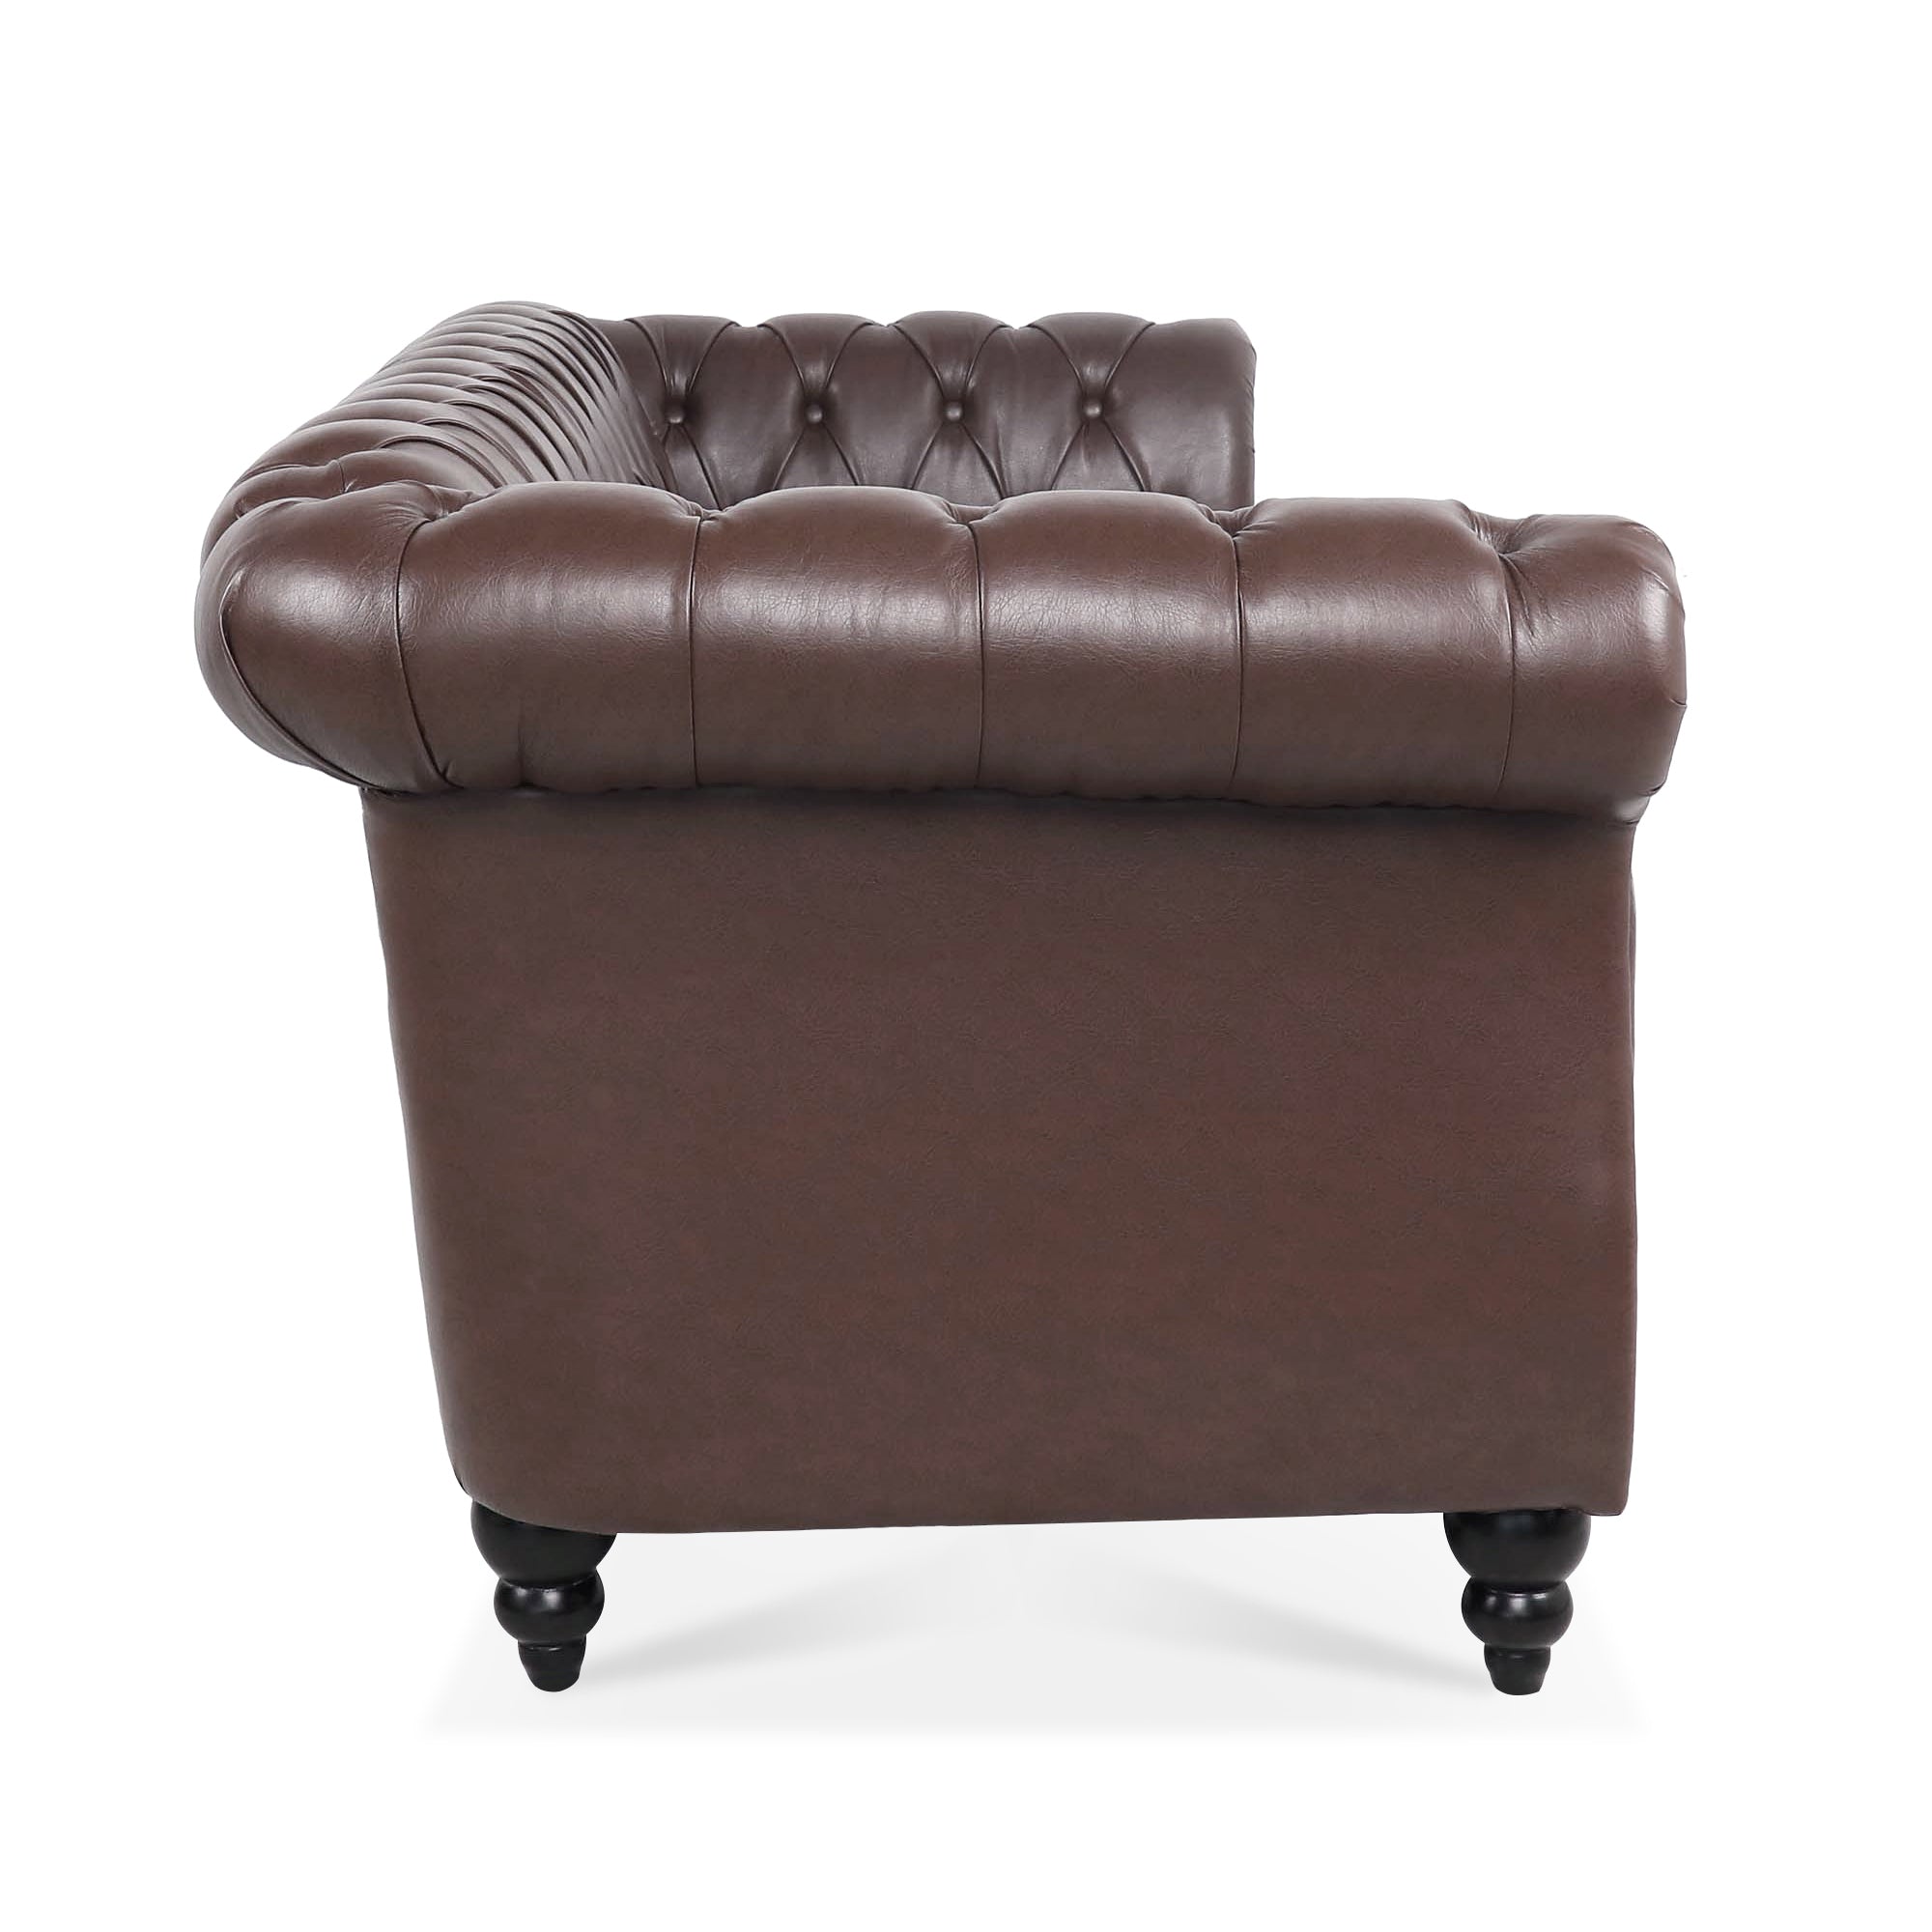 84" Dark Brown Faux Leather Chesterfield Sofa With Nailhead Trim